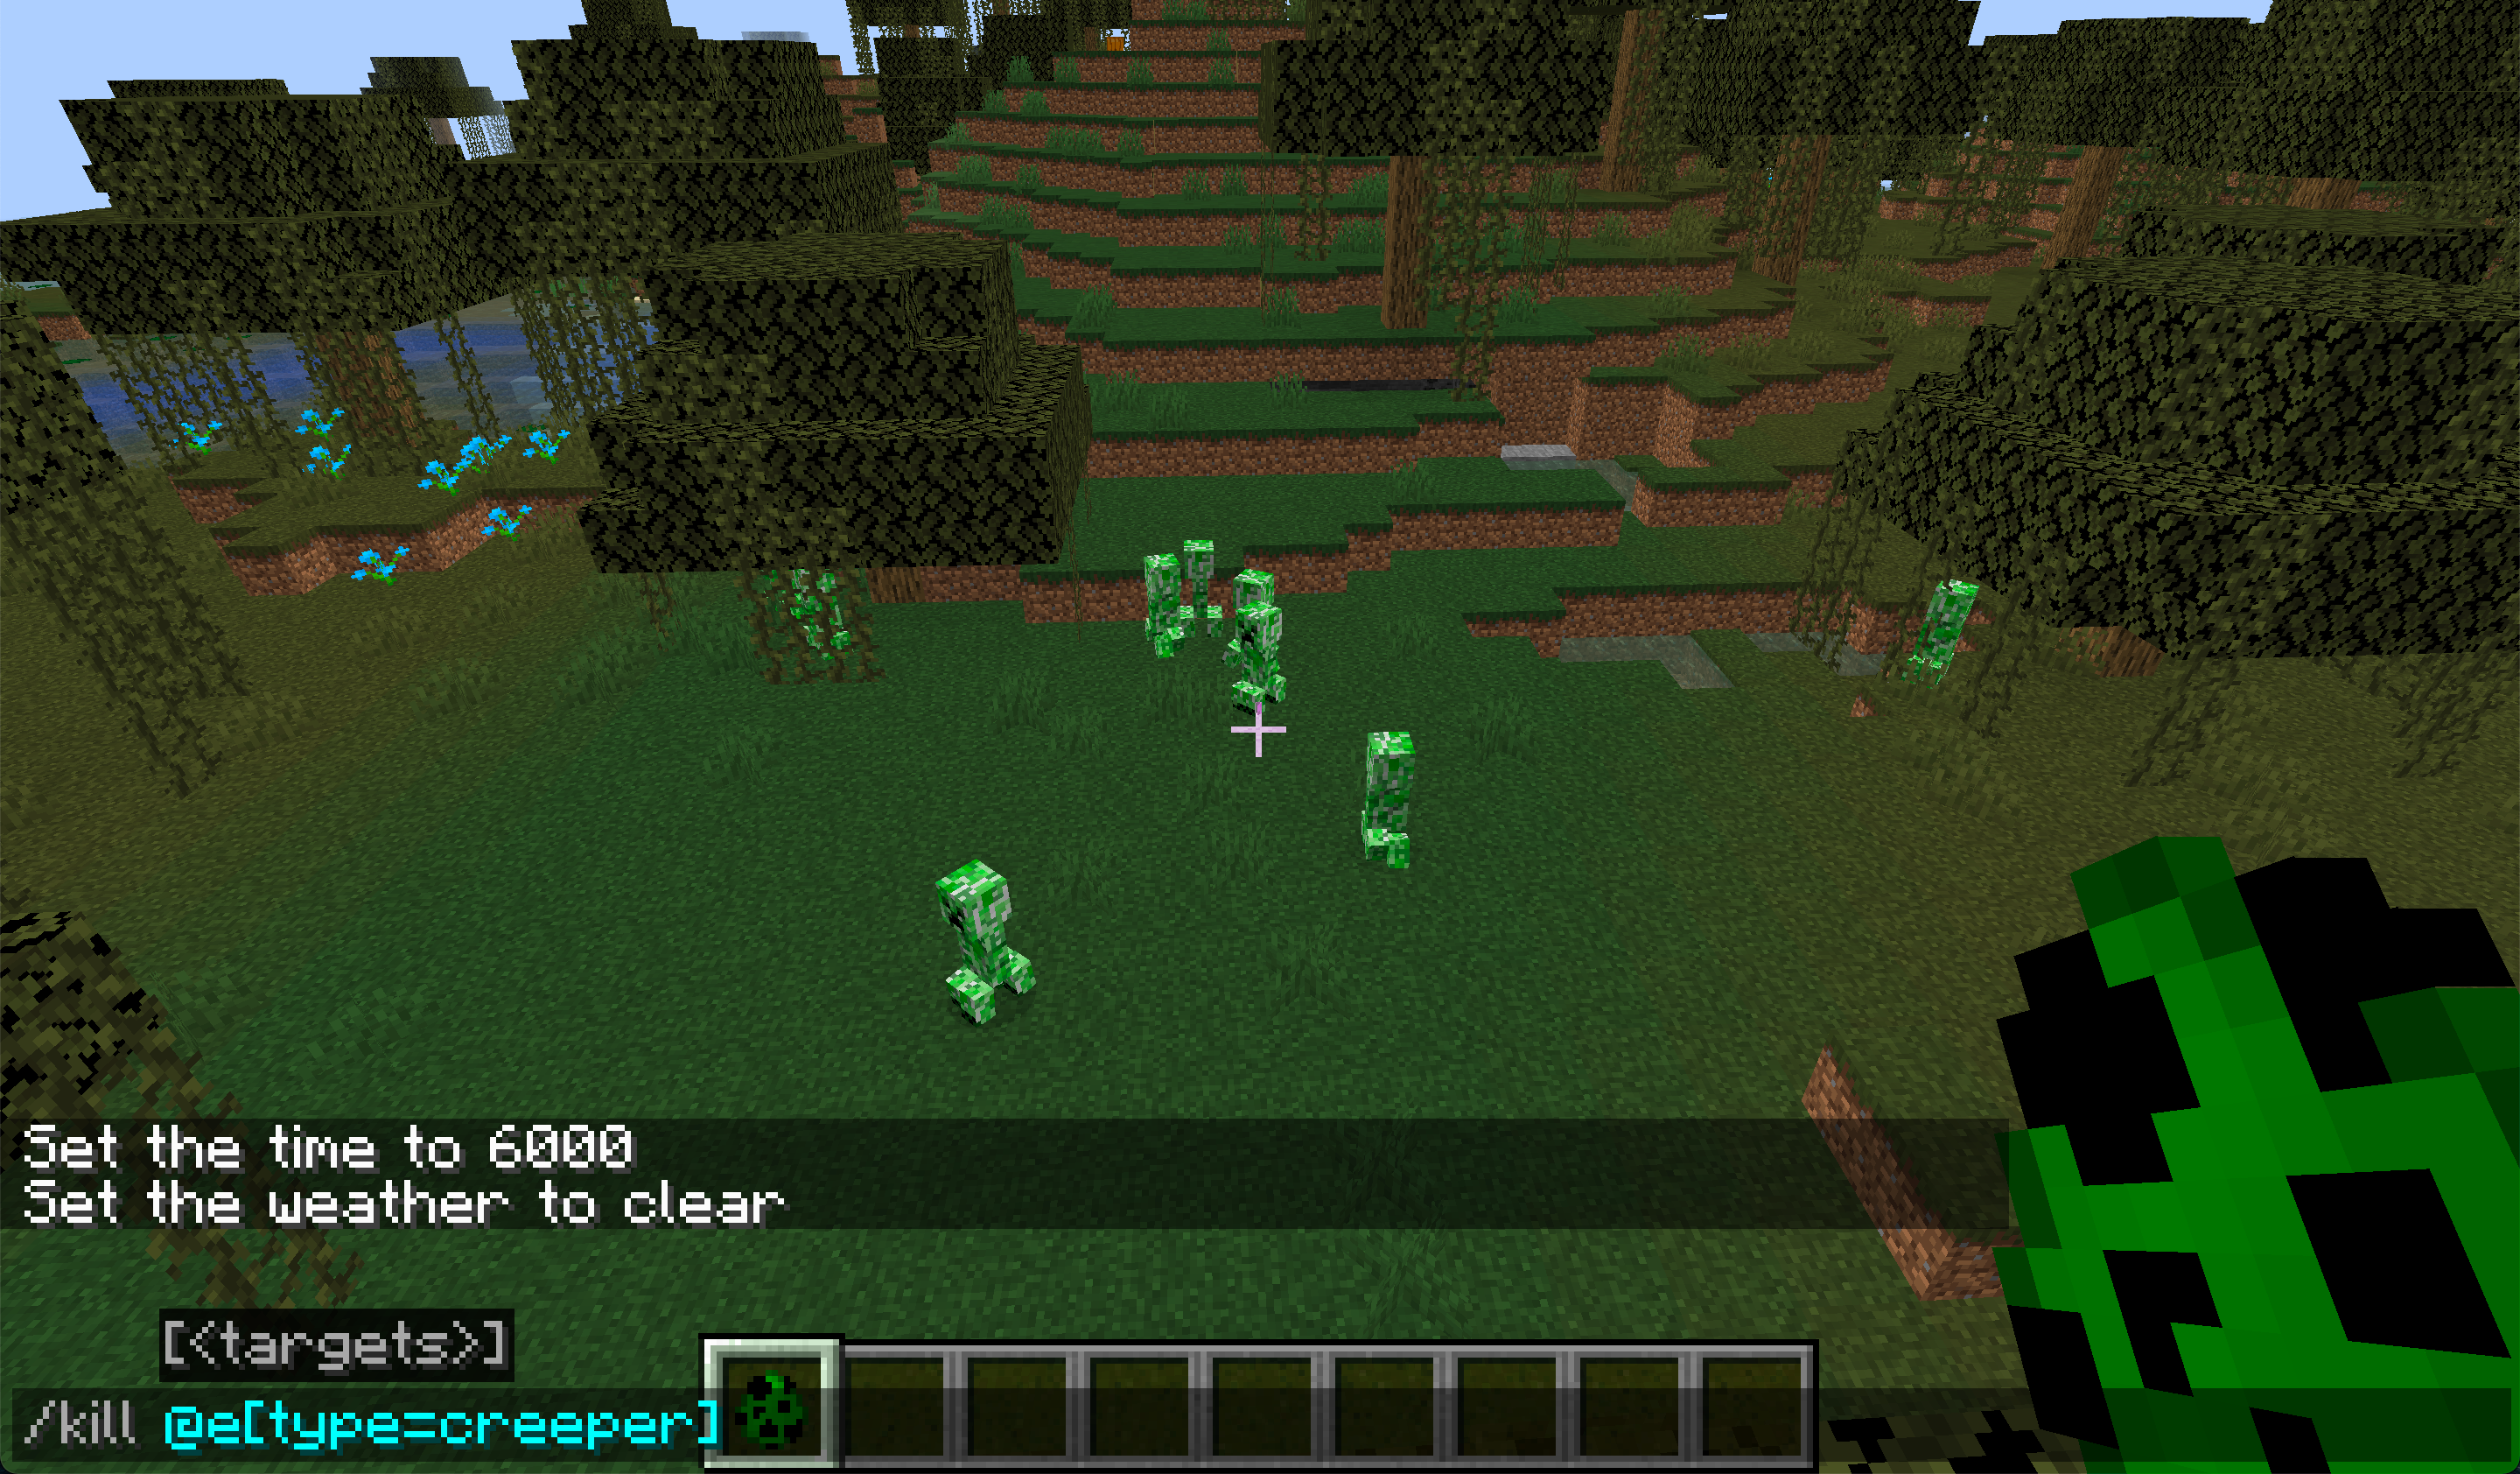 A screenshot of Minecraft, with the /kill command entered into the chat.